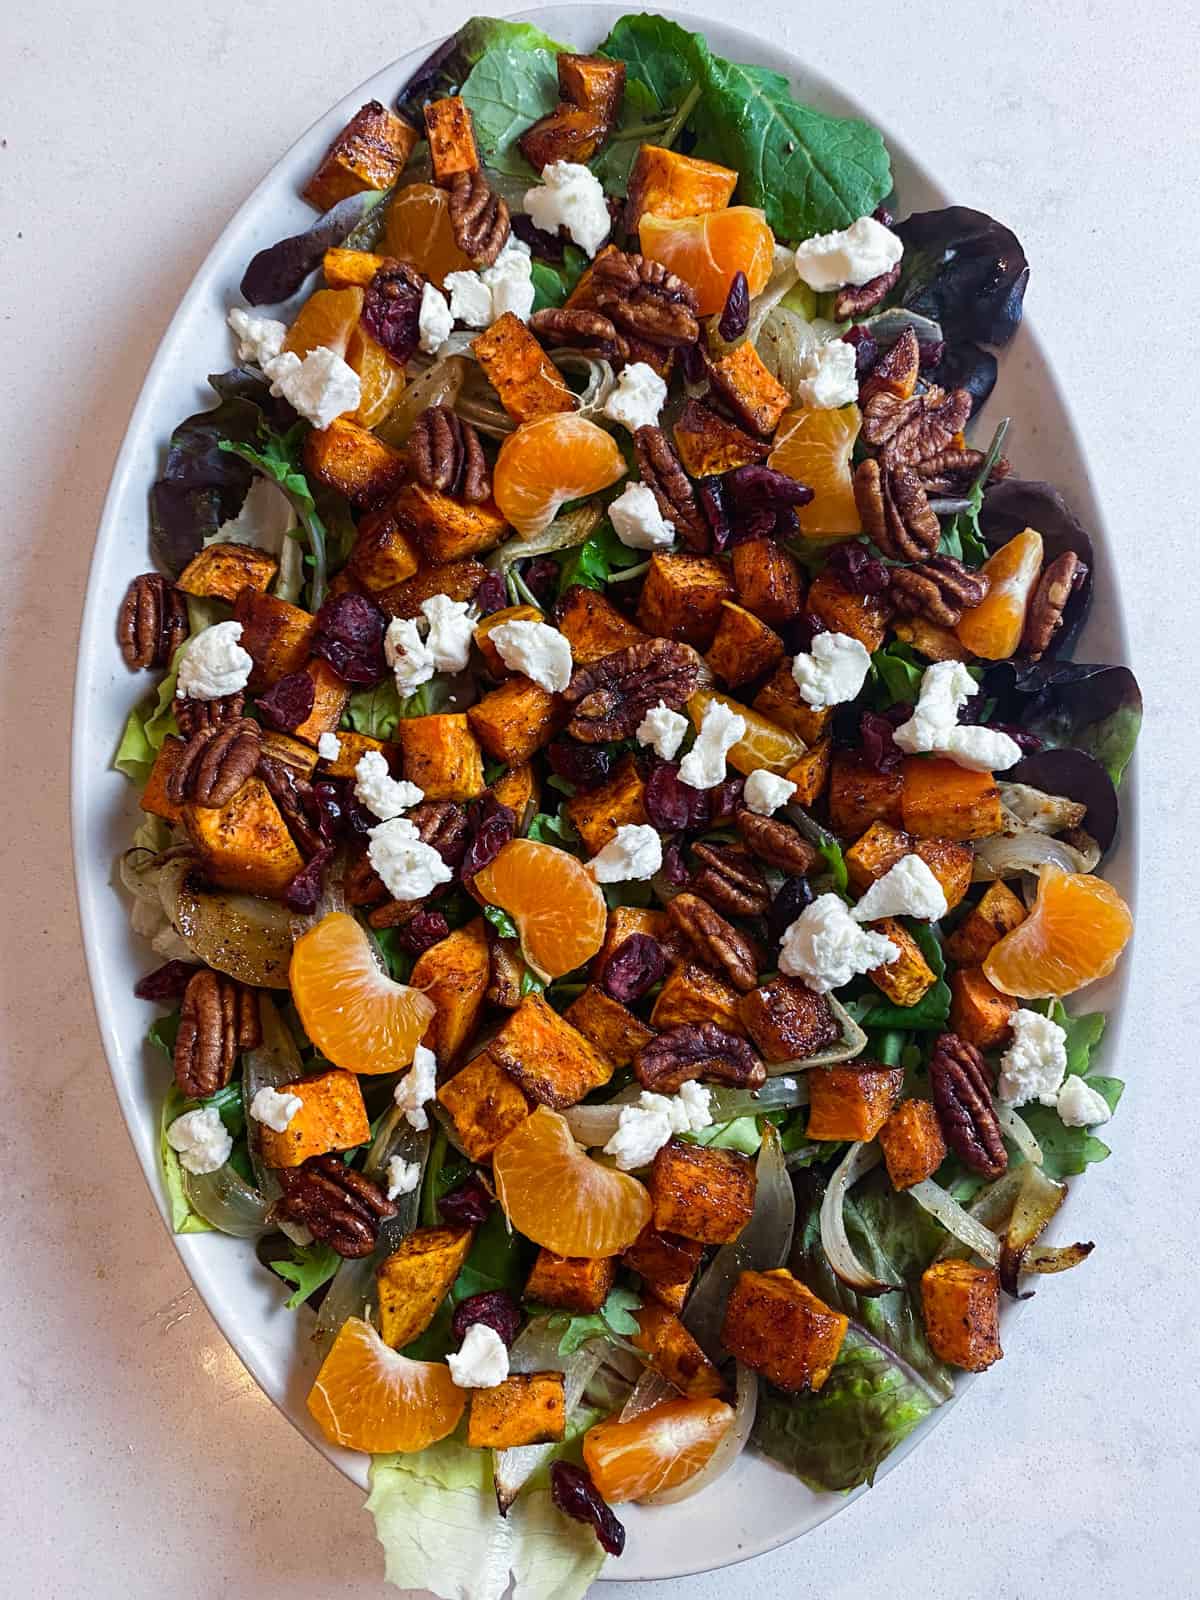 Layer clementine segments, candied pecans, dried cranberries and goat cheese onto the roasted sweet potato salad.